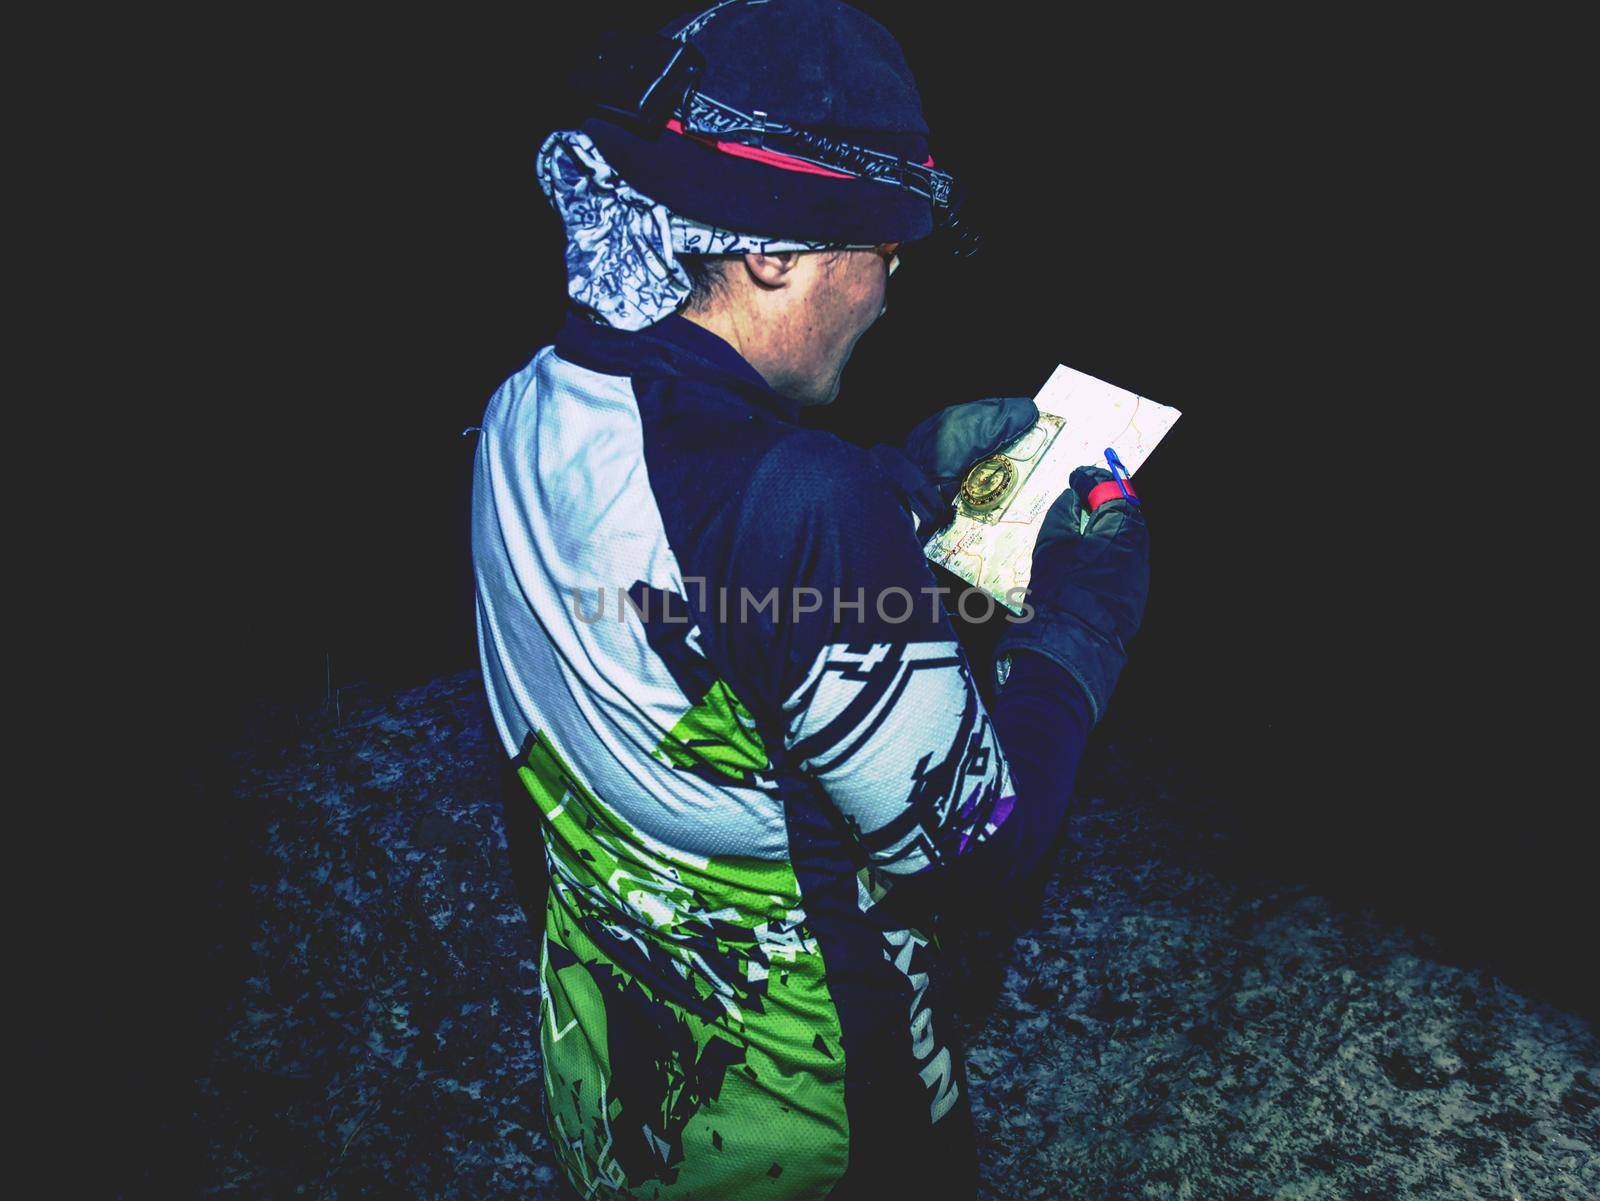 Winter night extreme runner control map.  January 25th 2019, Novy Bor, Czech Republic. Girl in forest reading map and checking a control point. Selective focus